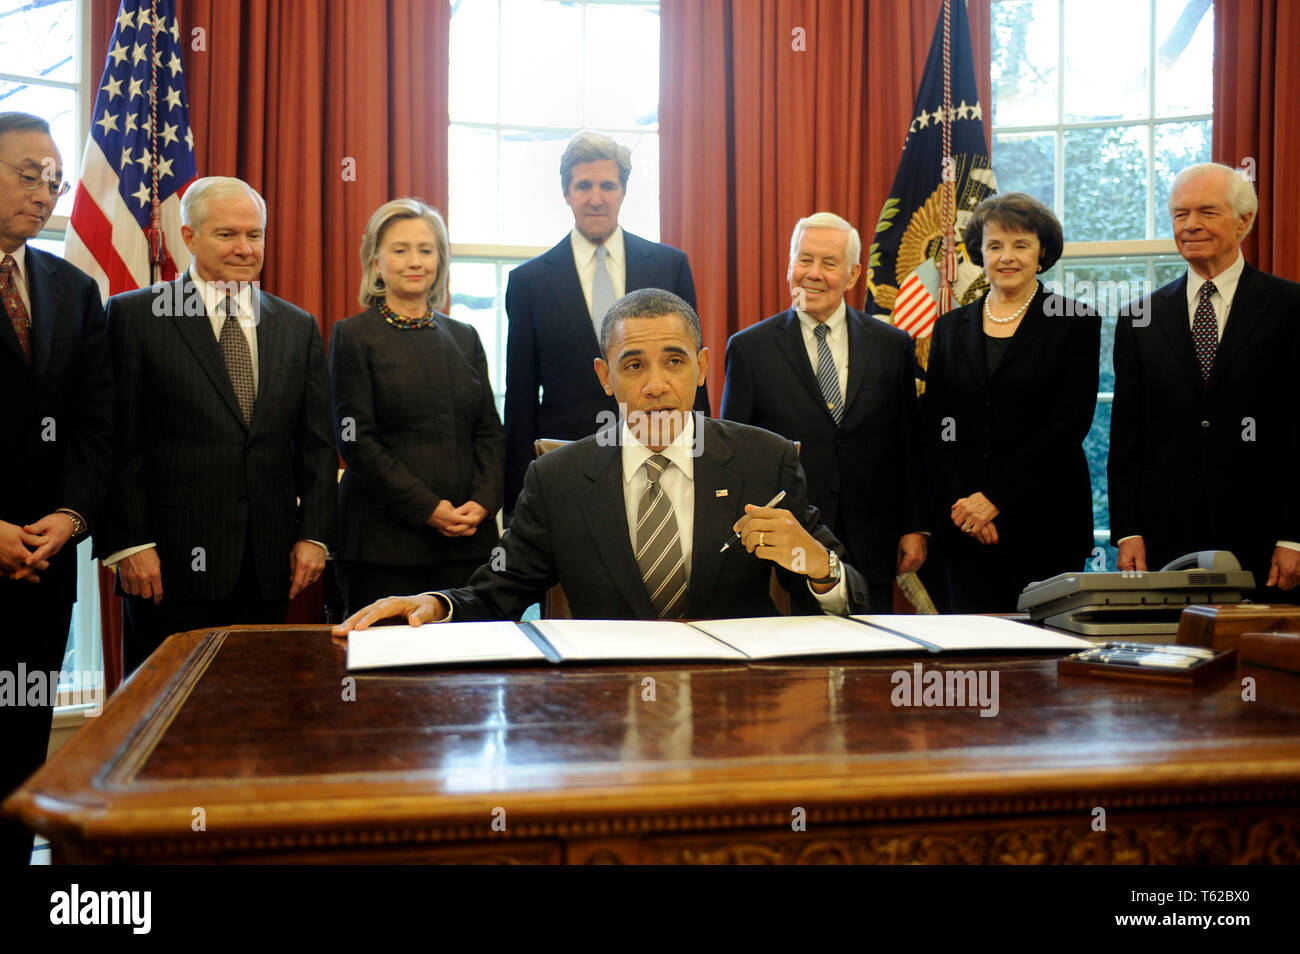 ***FILE PHOTO*** Former Senator Richard Lugar Has Passed Away. United States President Barack Obama signs the New START Treaty during a ceremony in the Oval Office of the White House, with, from left, U.S. Secretary of Energy Steven Chu, U.S. Secretary of Defense Robert Gates, U.S. Secretary of State Hillary Rodham Clinton, U.S. Senator John Kerry (Democrat of Massachusetts), U.S. Senator Richard Lugar (Republican of Indiana), U.S. Senator Dianne Feinstein (Democrat of California), and U.S. Senator Thad Cochran (Republican of Mississippi).Credit: Leslie E. Kossoff/Pool via CNP /MediaPunch Stock Photo